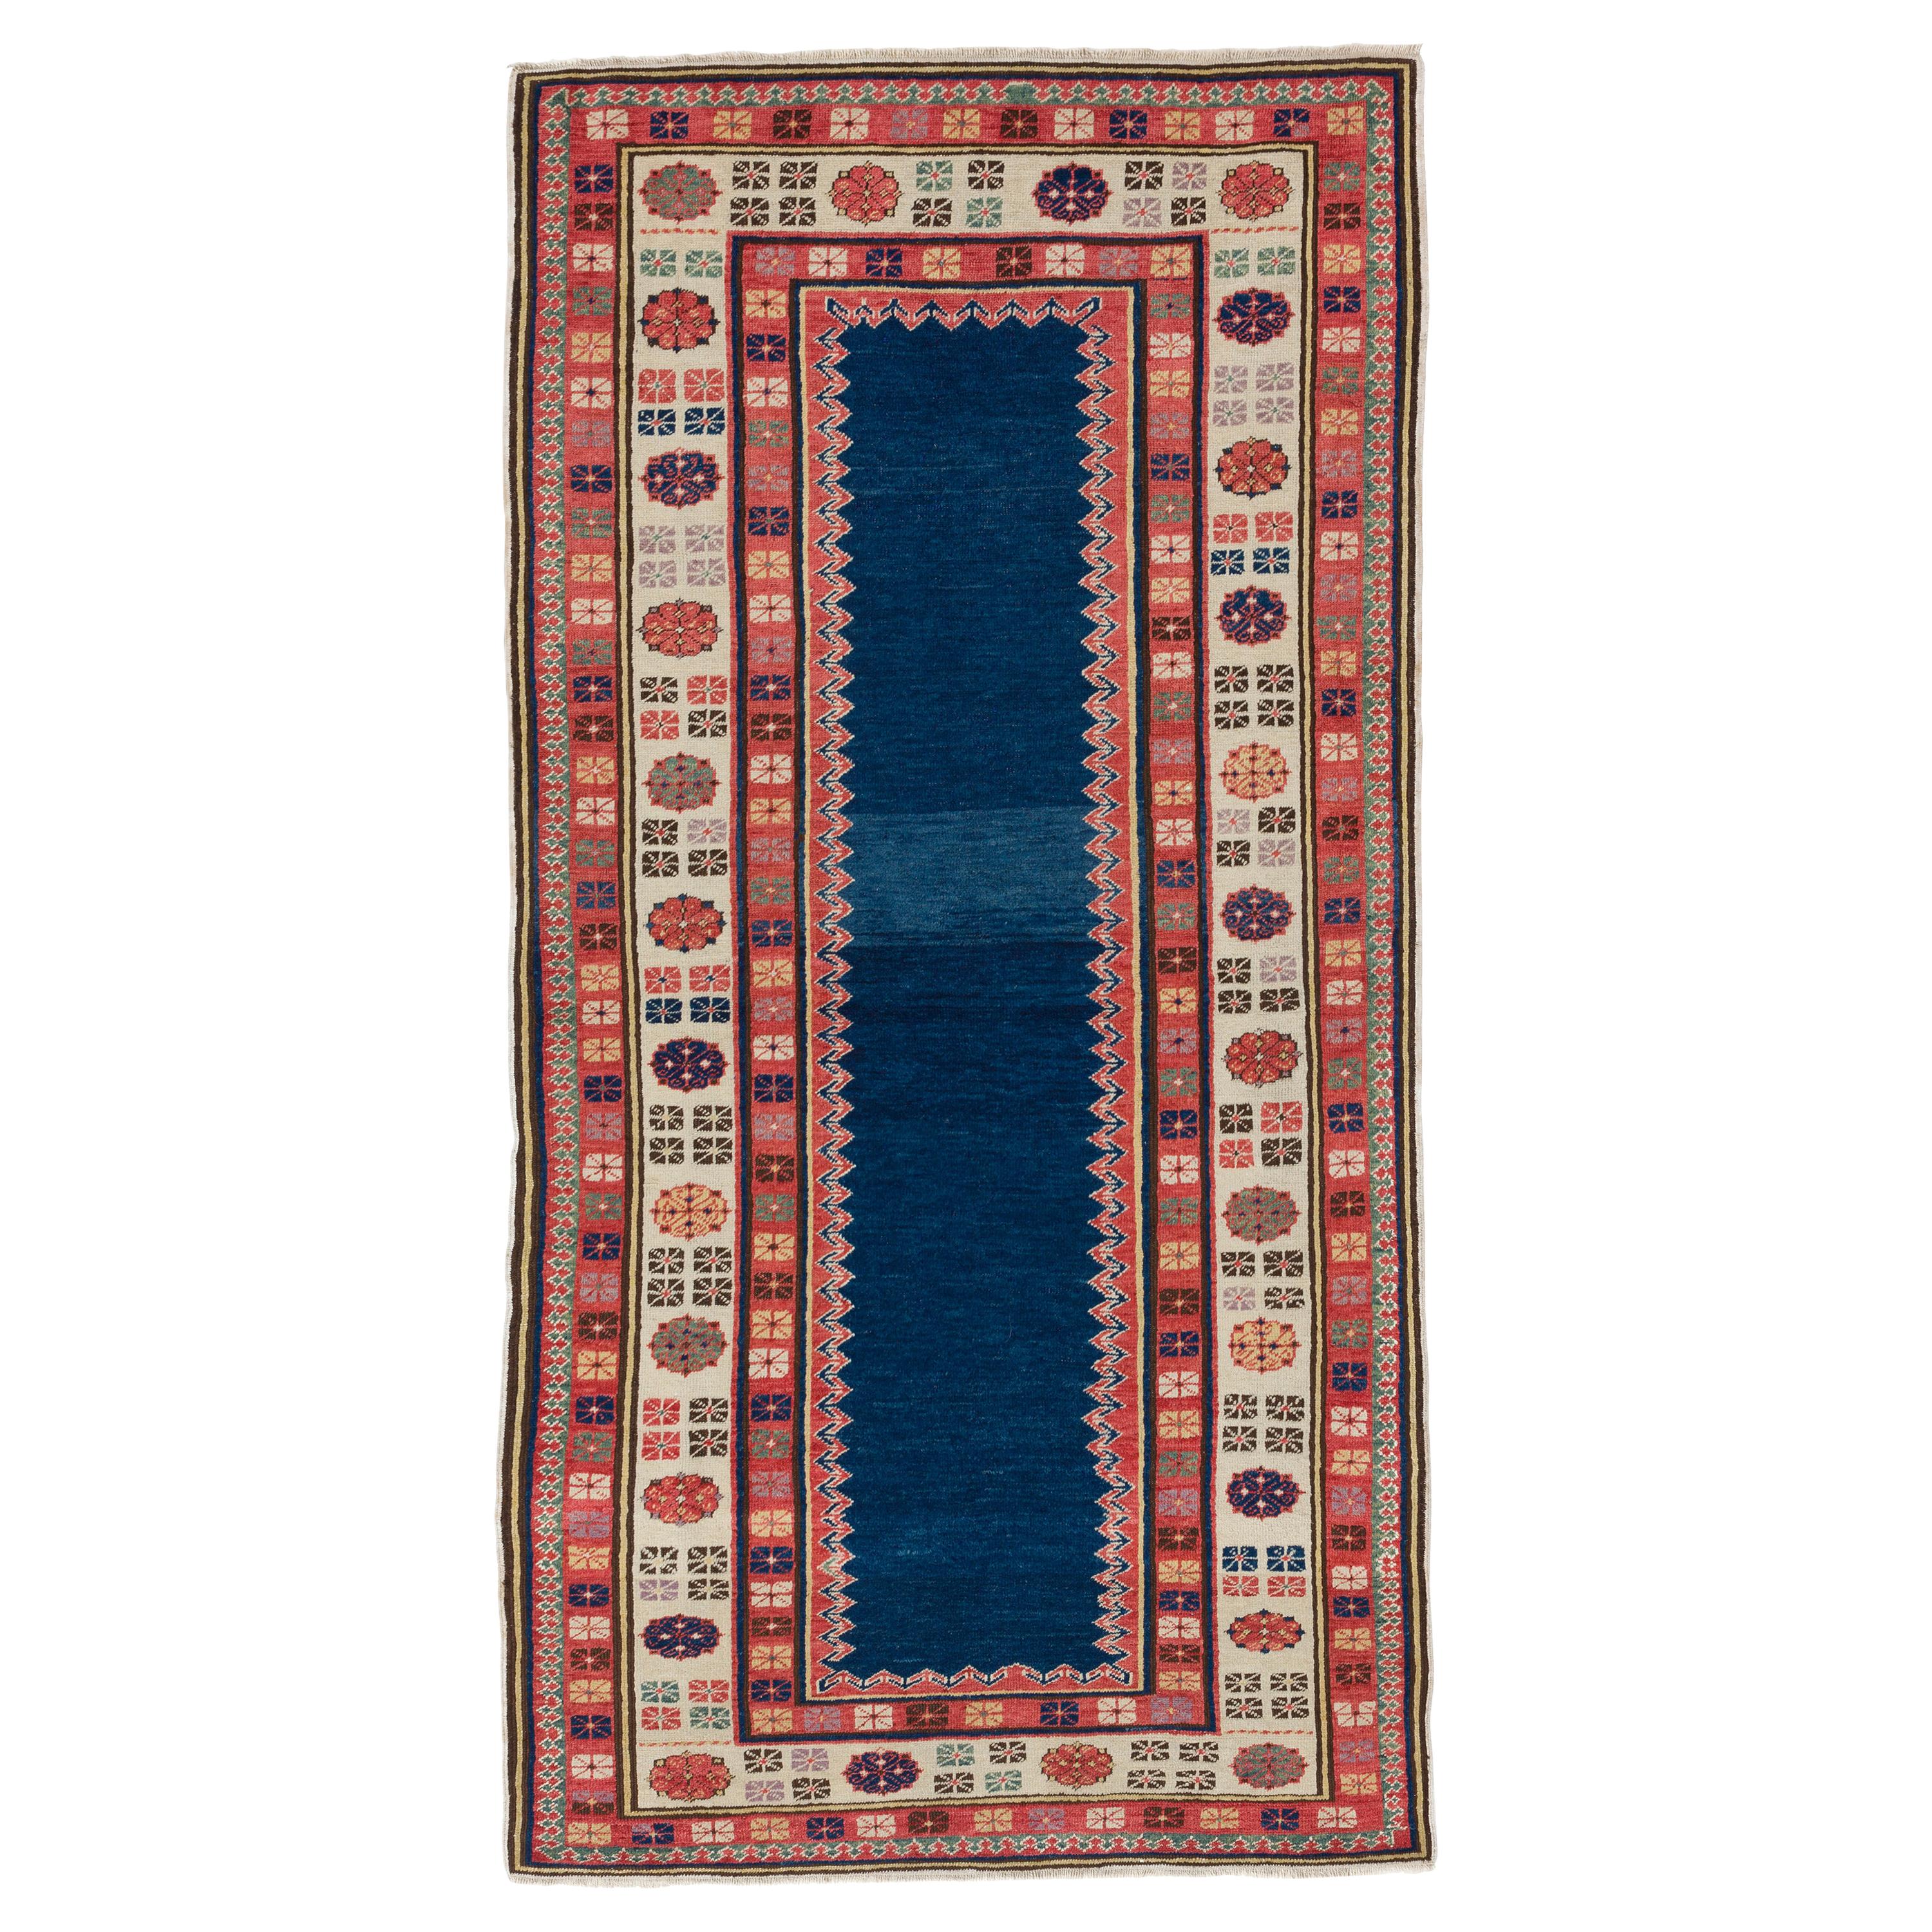 Vintage Hand-Knotted Caucasian Talish Rug, 100% Wool and Natural Dyes